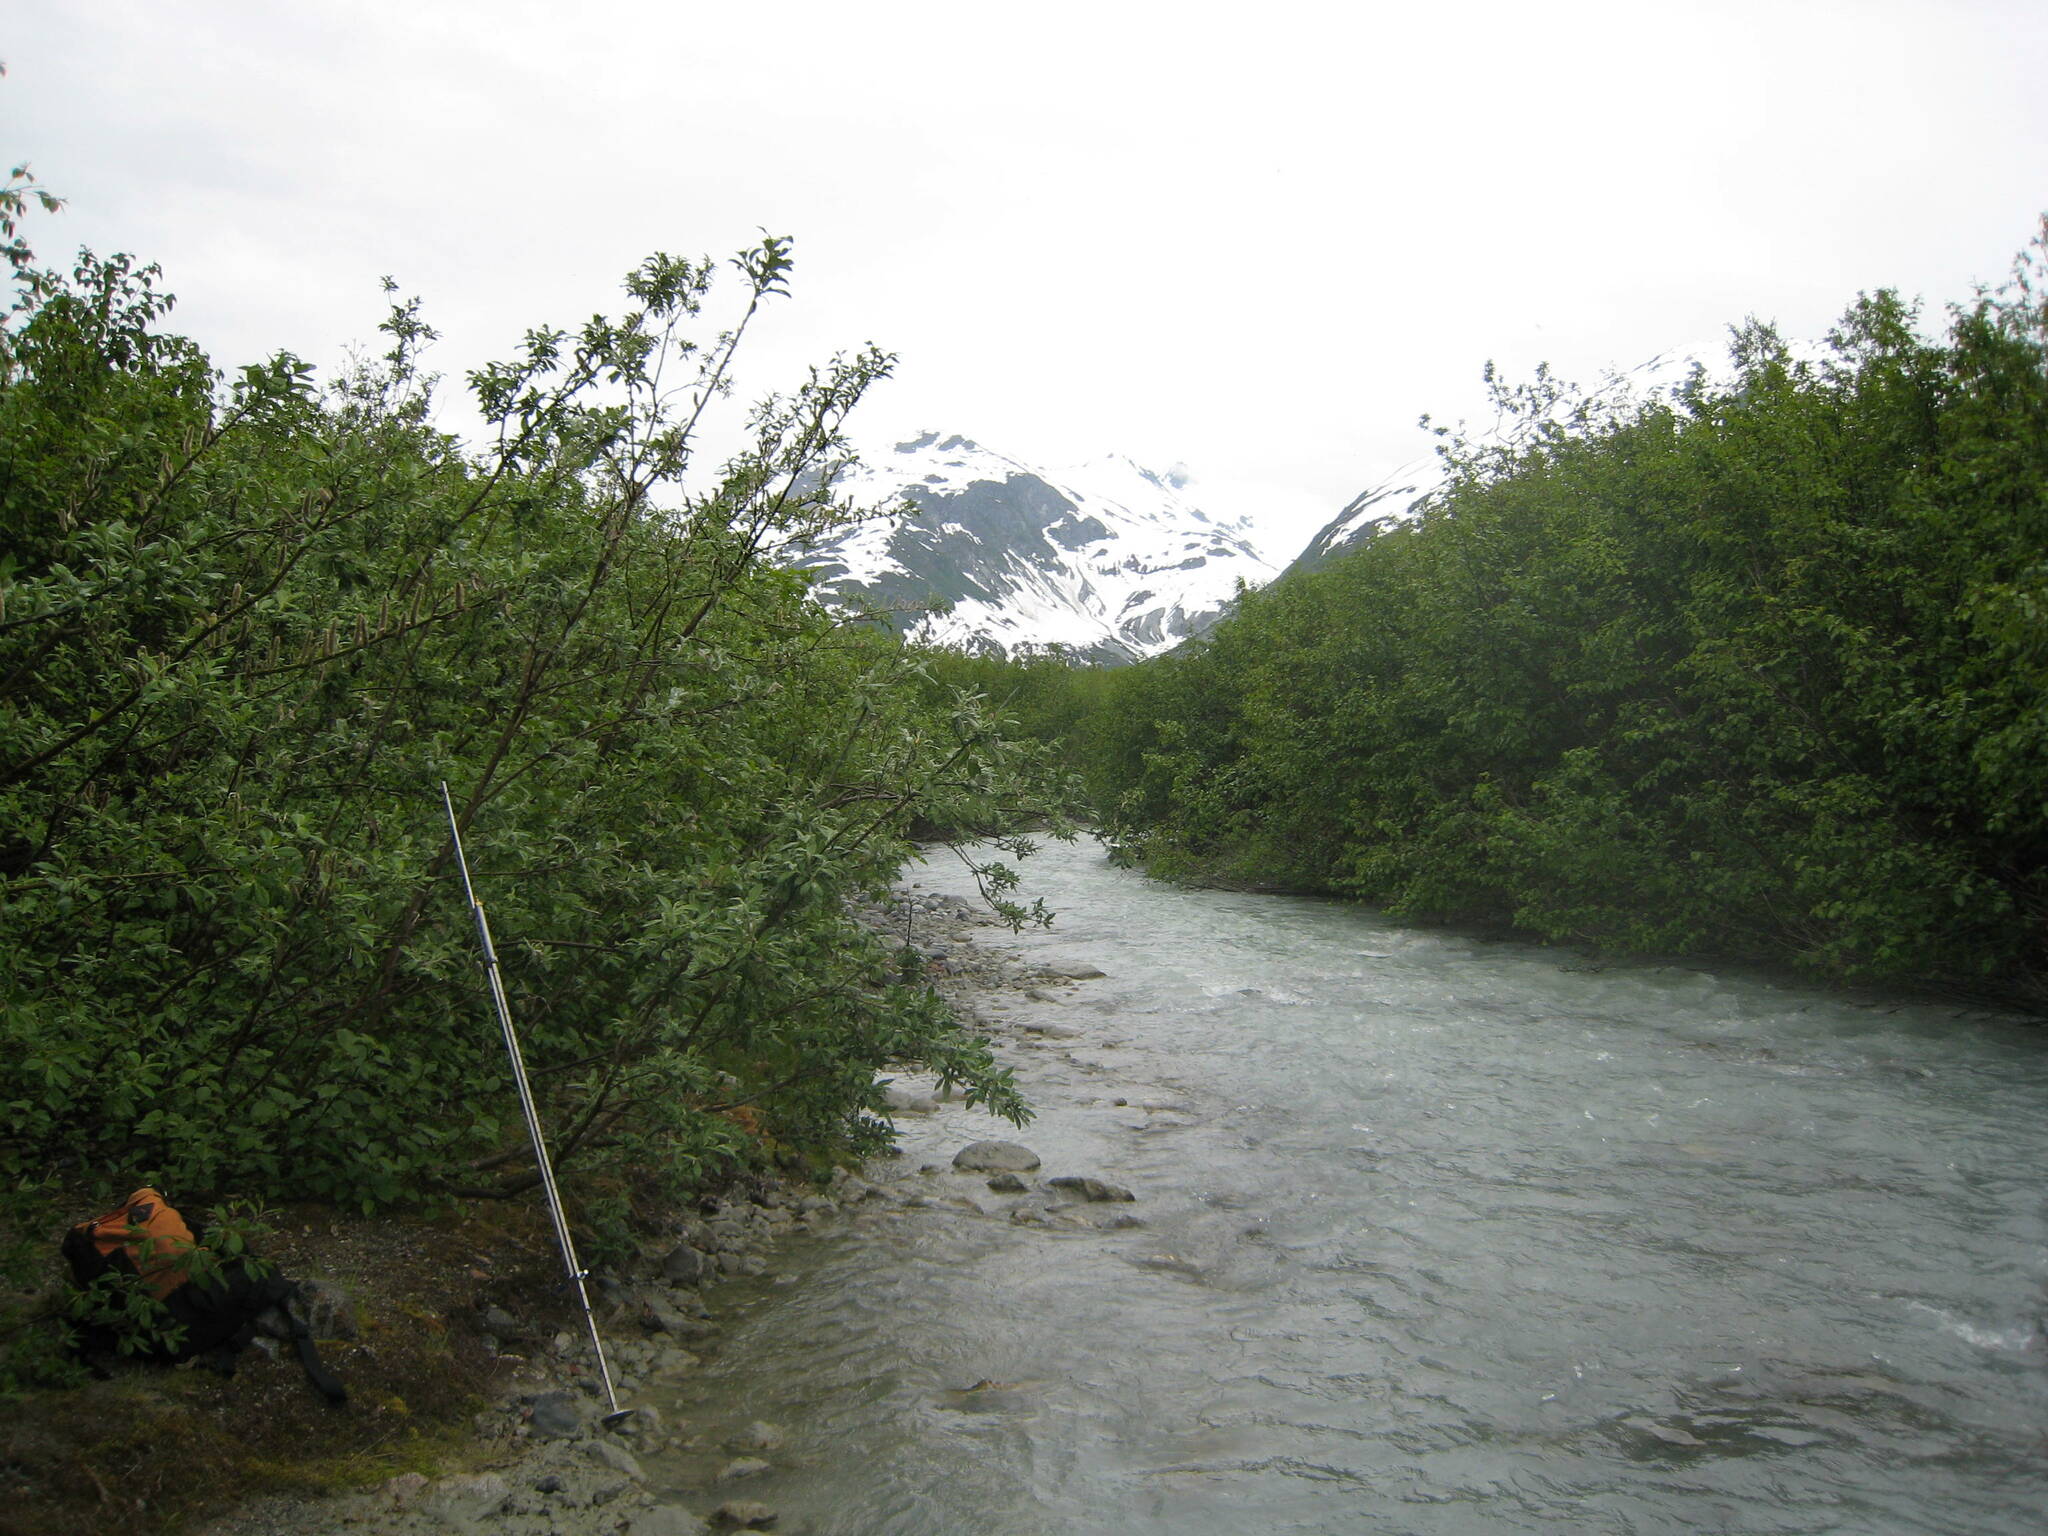 Stonefly Creek, in Glacier Bay, came out from under glacier ice in the last century and now has thousands of pink salmon spawning in it. (Courtesy Photo / Sonia Nagorski)